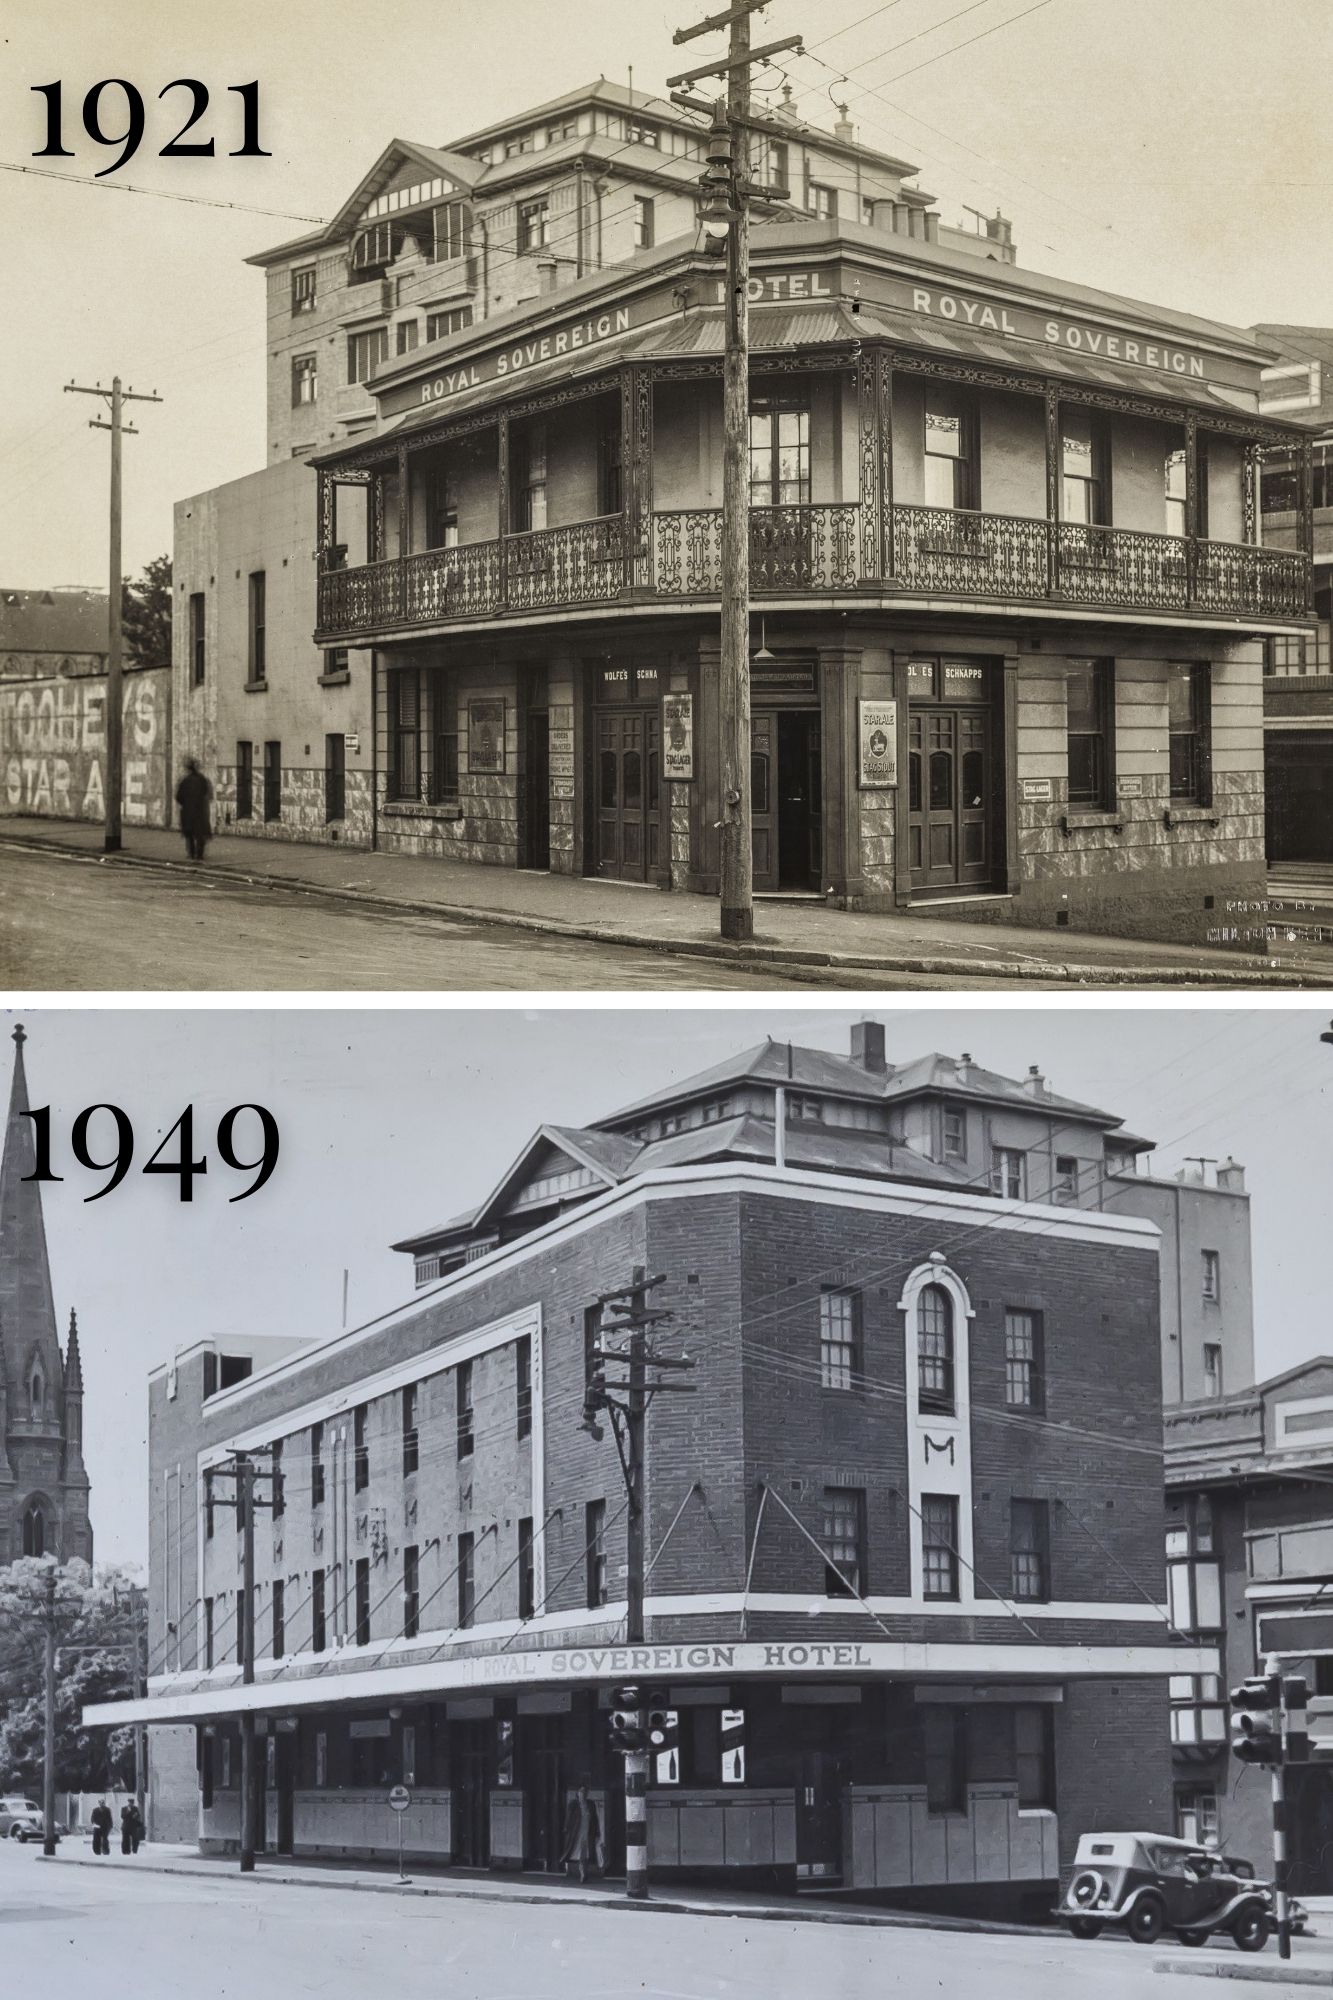 Photograph of Royal Sovereign Hotel in 1925 and 1949